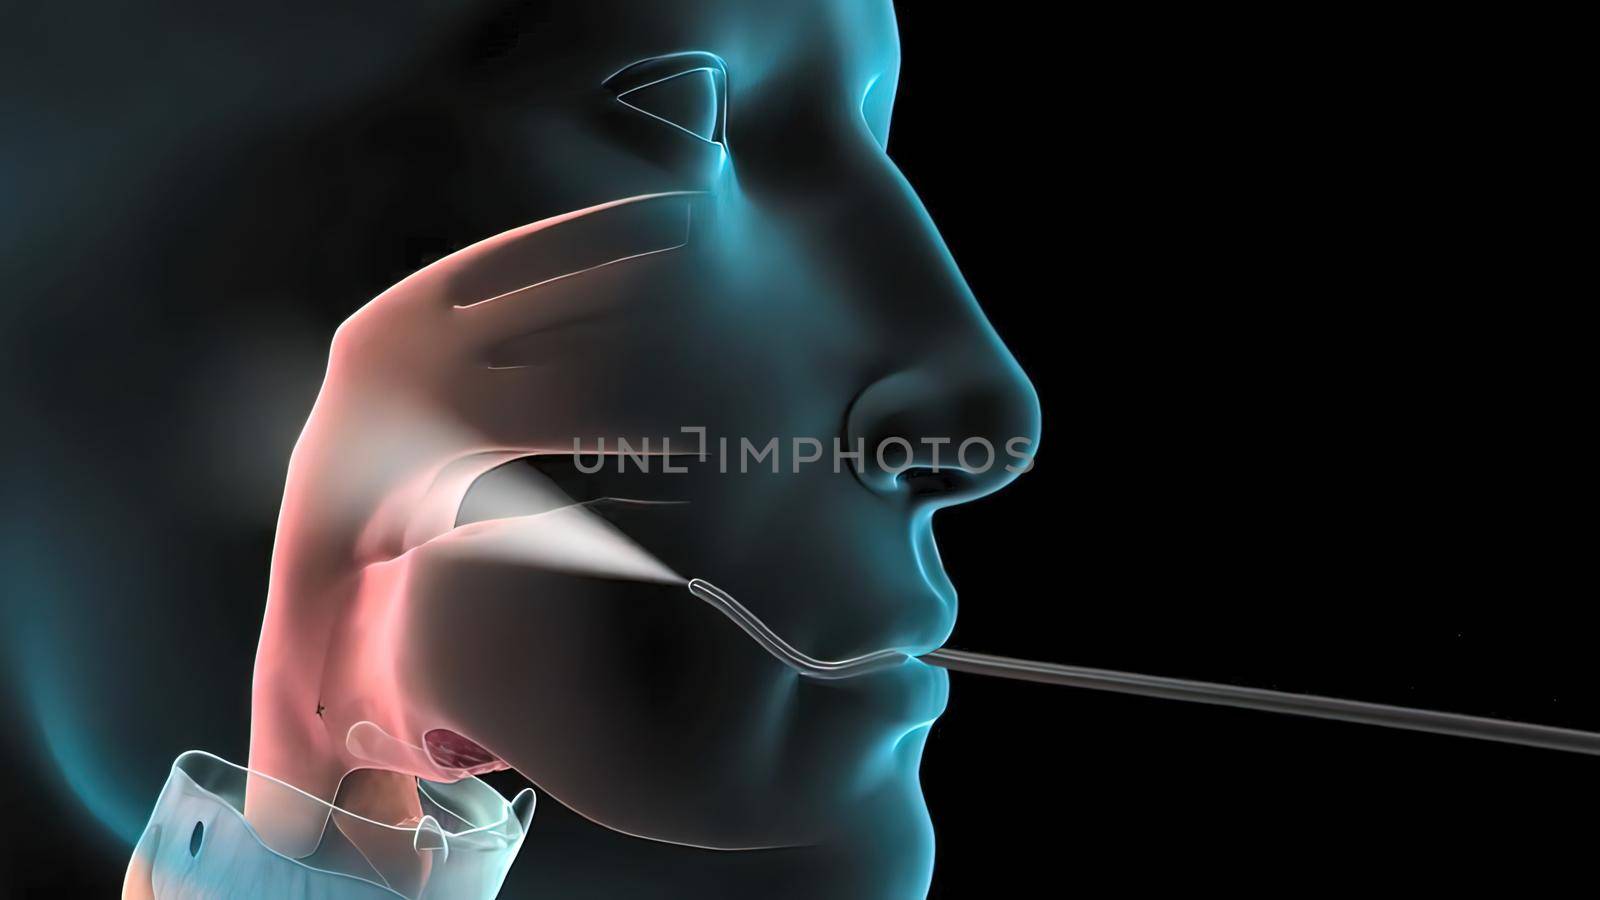 Medical doctor confirming condition of lungs using bronchoscope and fluorescent image 3D illustration